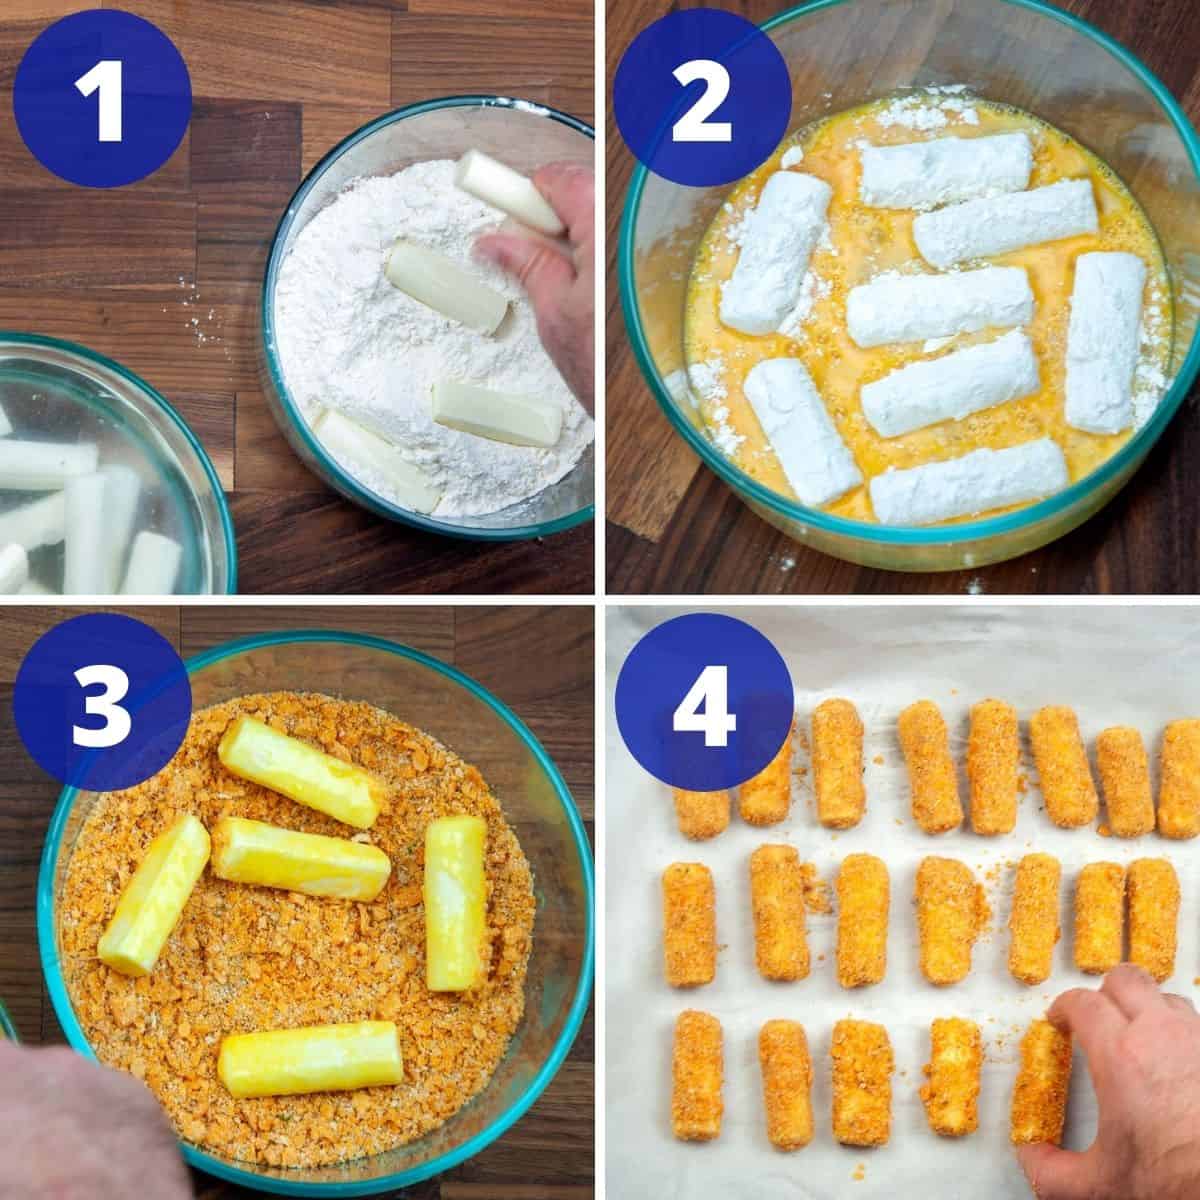 Dredging chees esticks in flour, egg, Cheez-It® mix, and placing on tray for freezing.